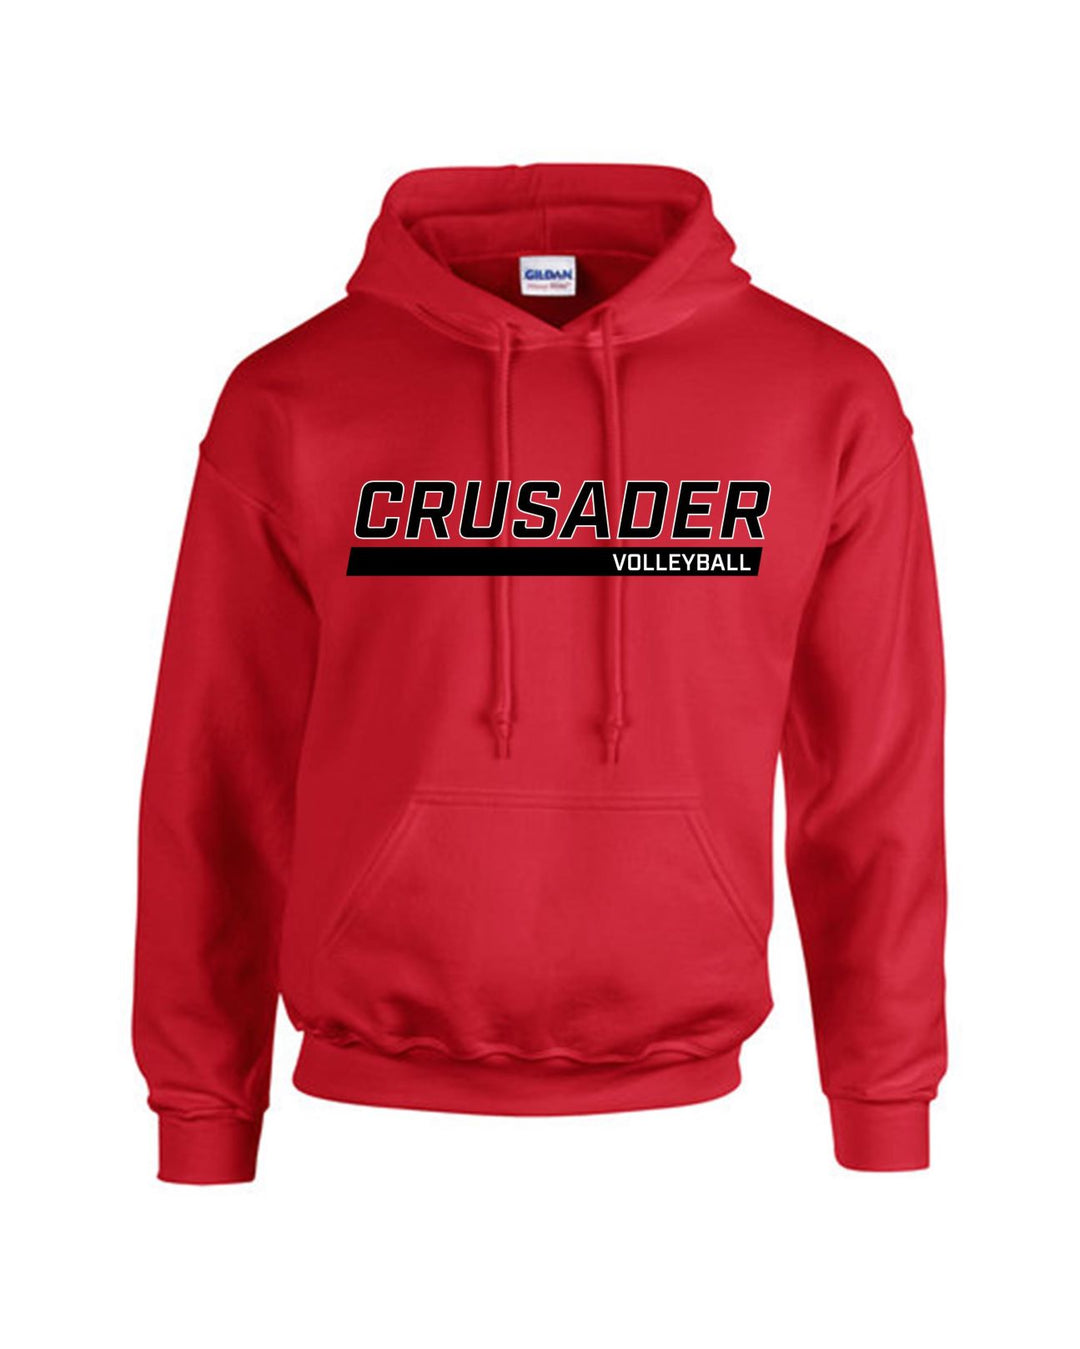 Carey Volleyball Youth Hoody WCU Volleyball Red Crusader - Third Coast Soccer